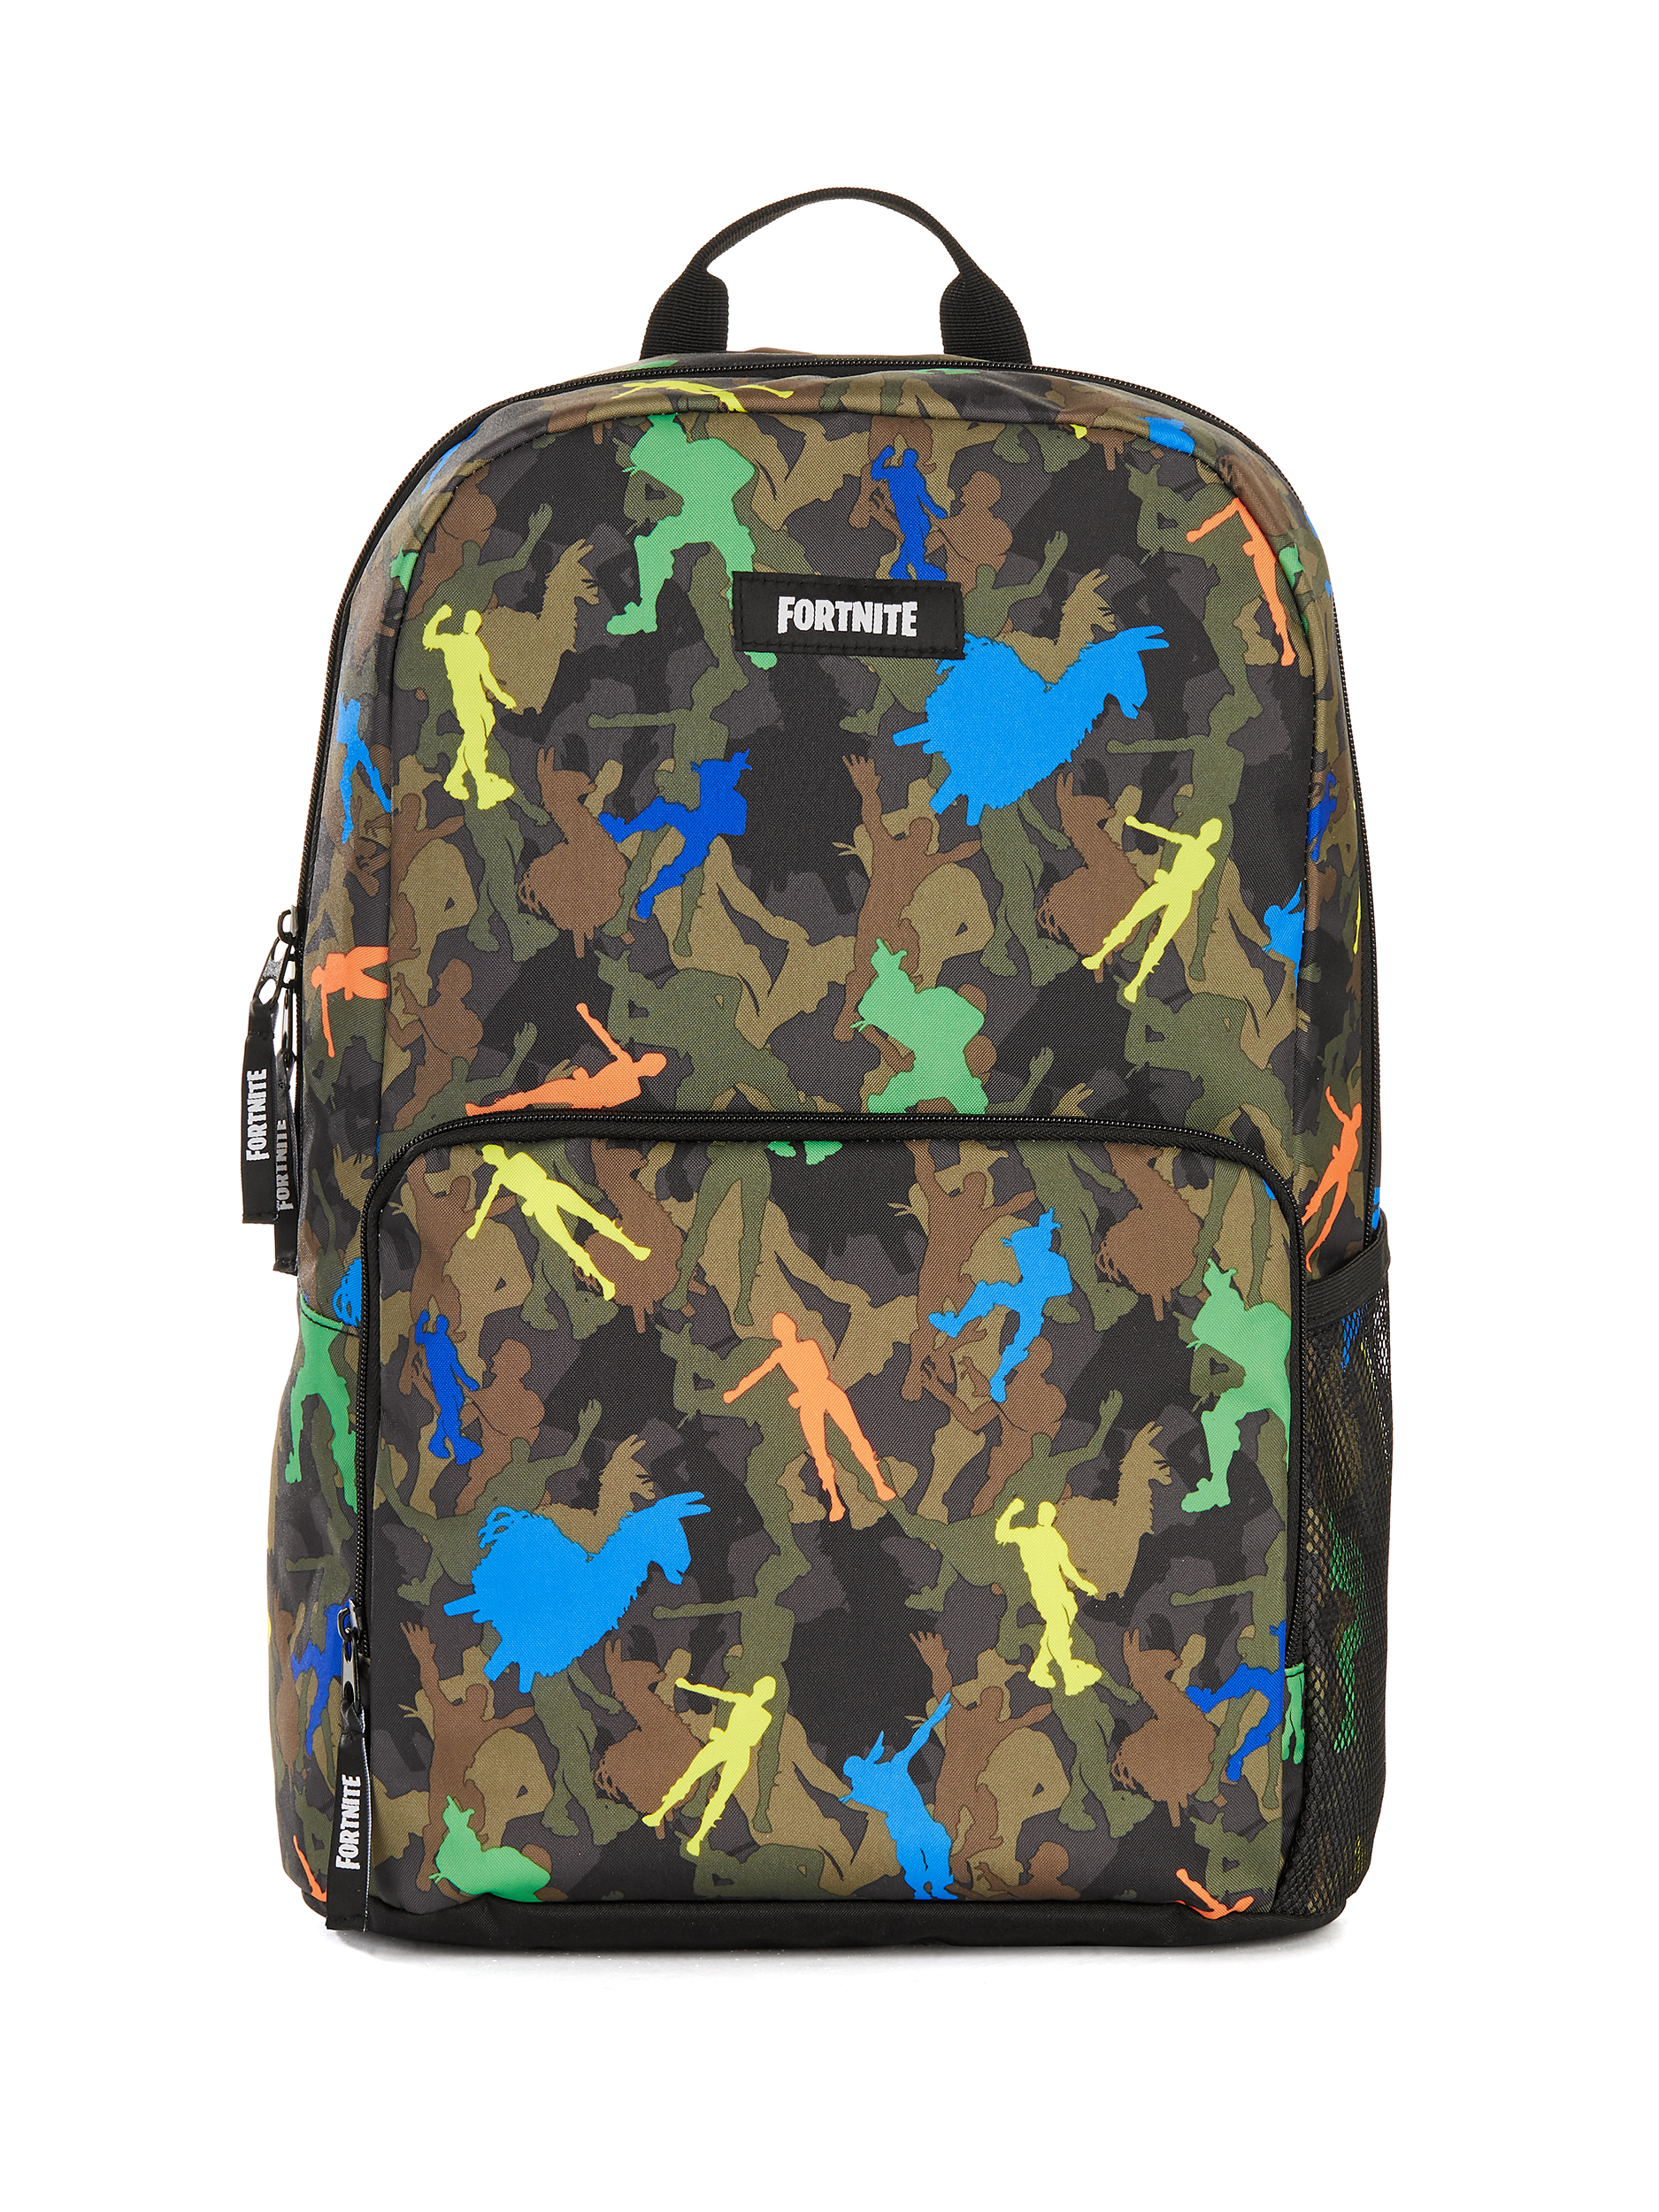 Fortnite Amplify Camo Dancing Silhouette Backpack - image 1 of 4